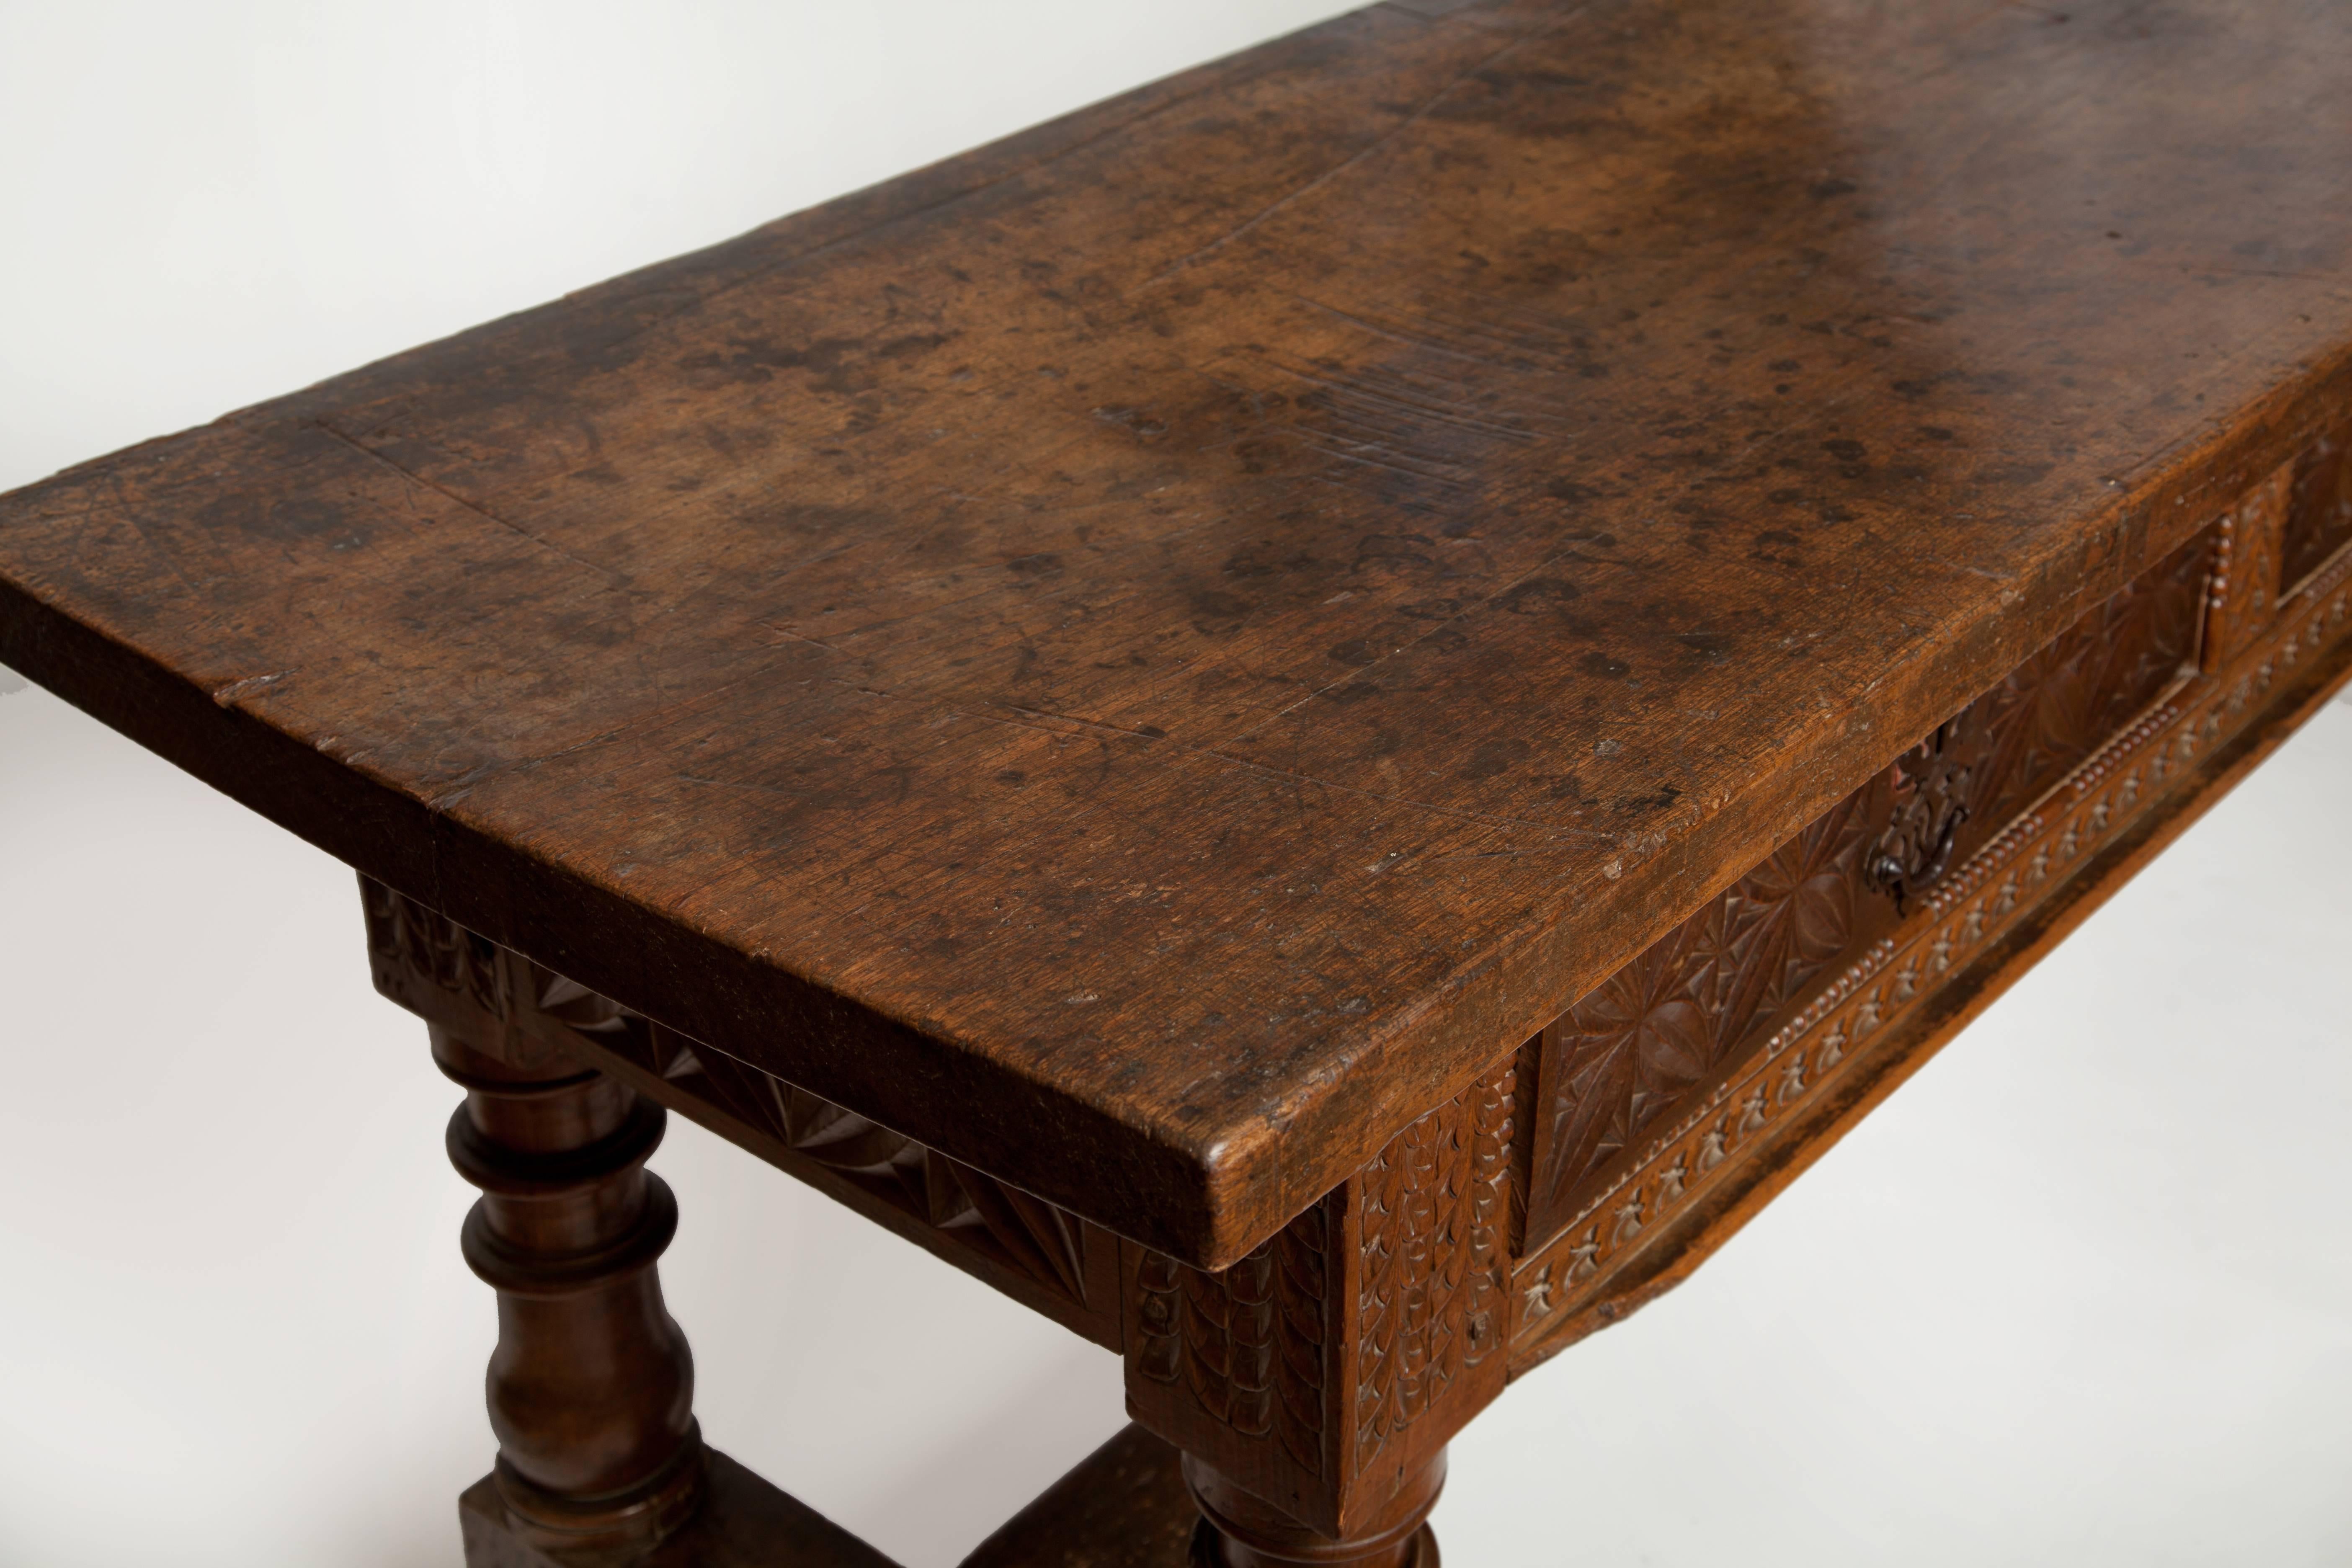 A very special antique - this is an 18th century Spanish walnut library table with single plank top and three carved drawers. It is also fully carved on the back side.